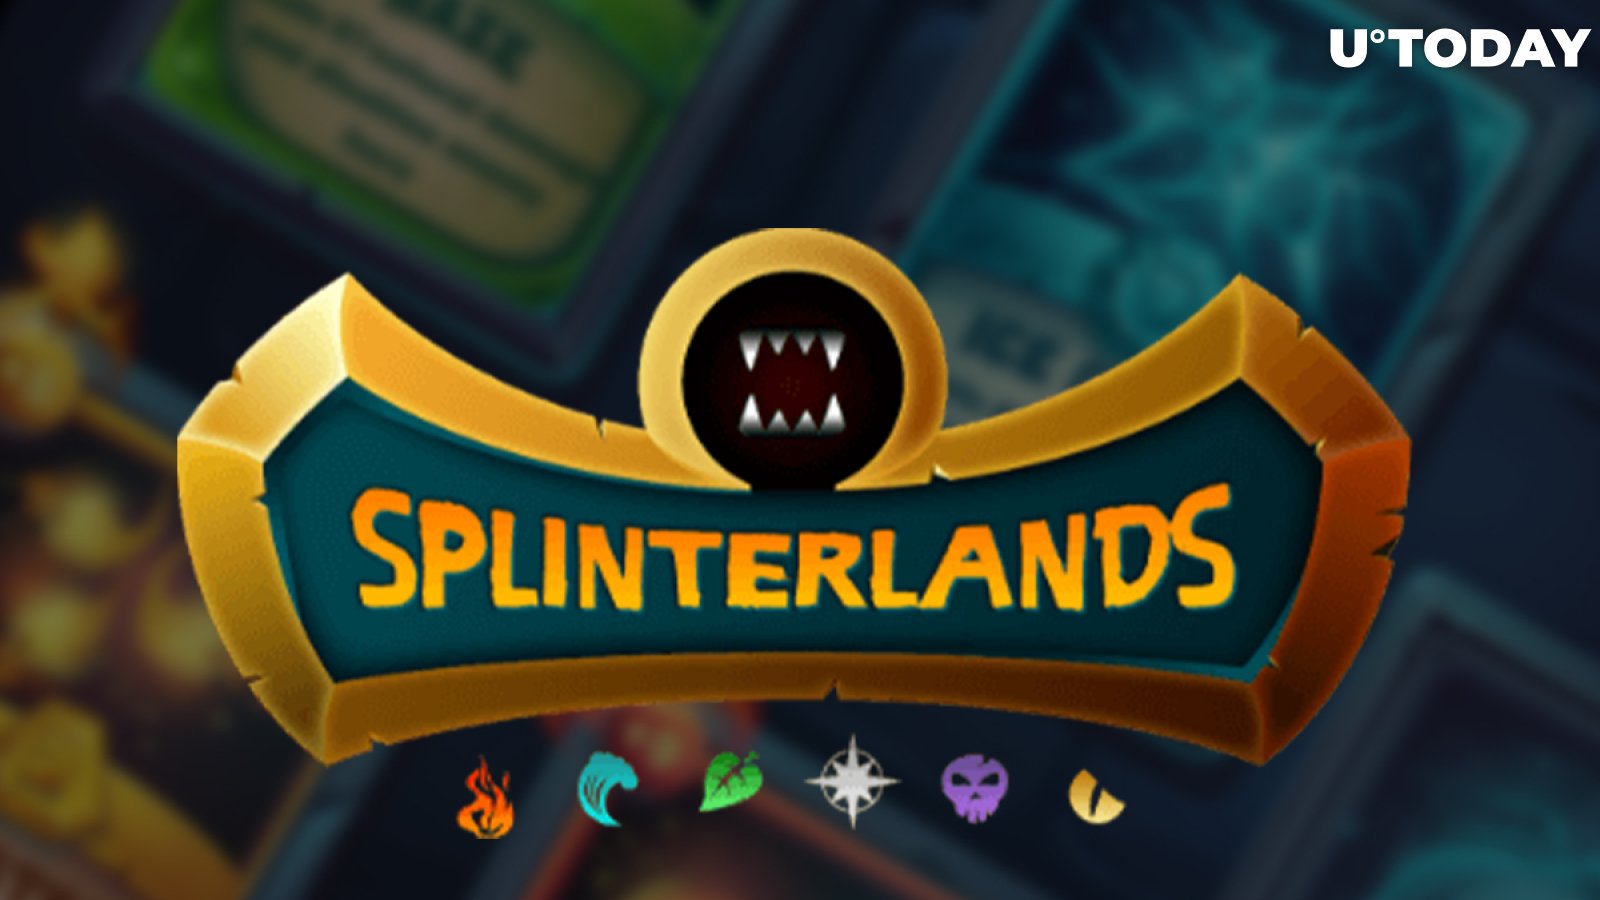 Splinterlands NFT Card Game Daily Users Indicator Spikes 2.5x in 30 Days